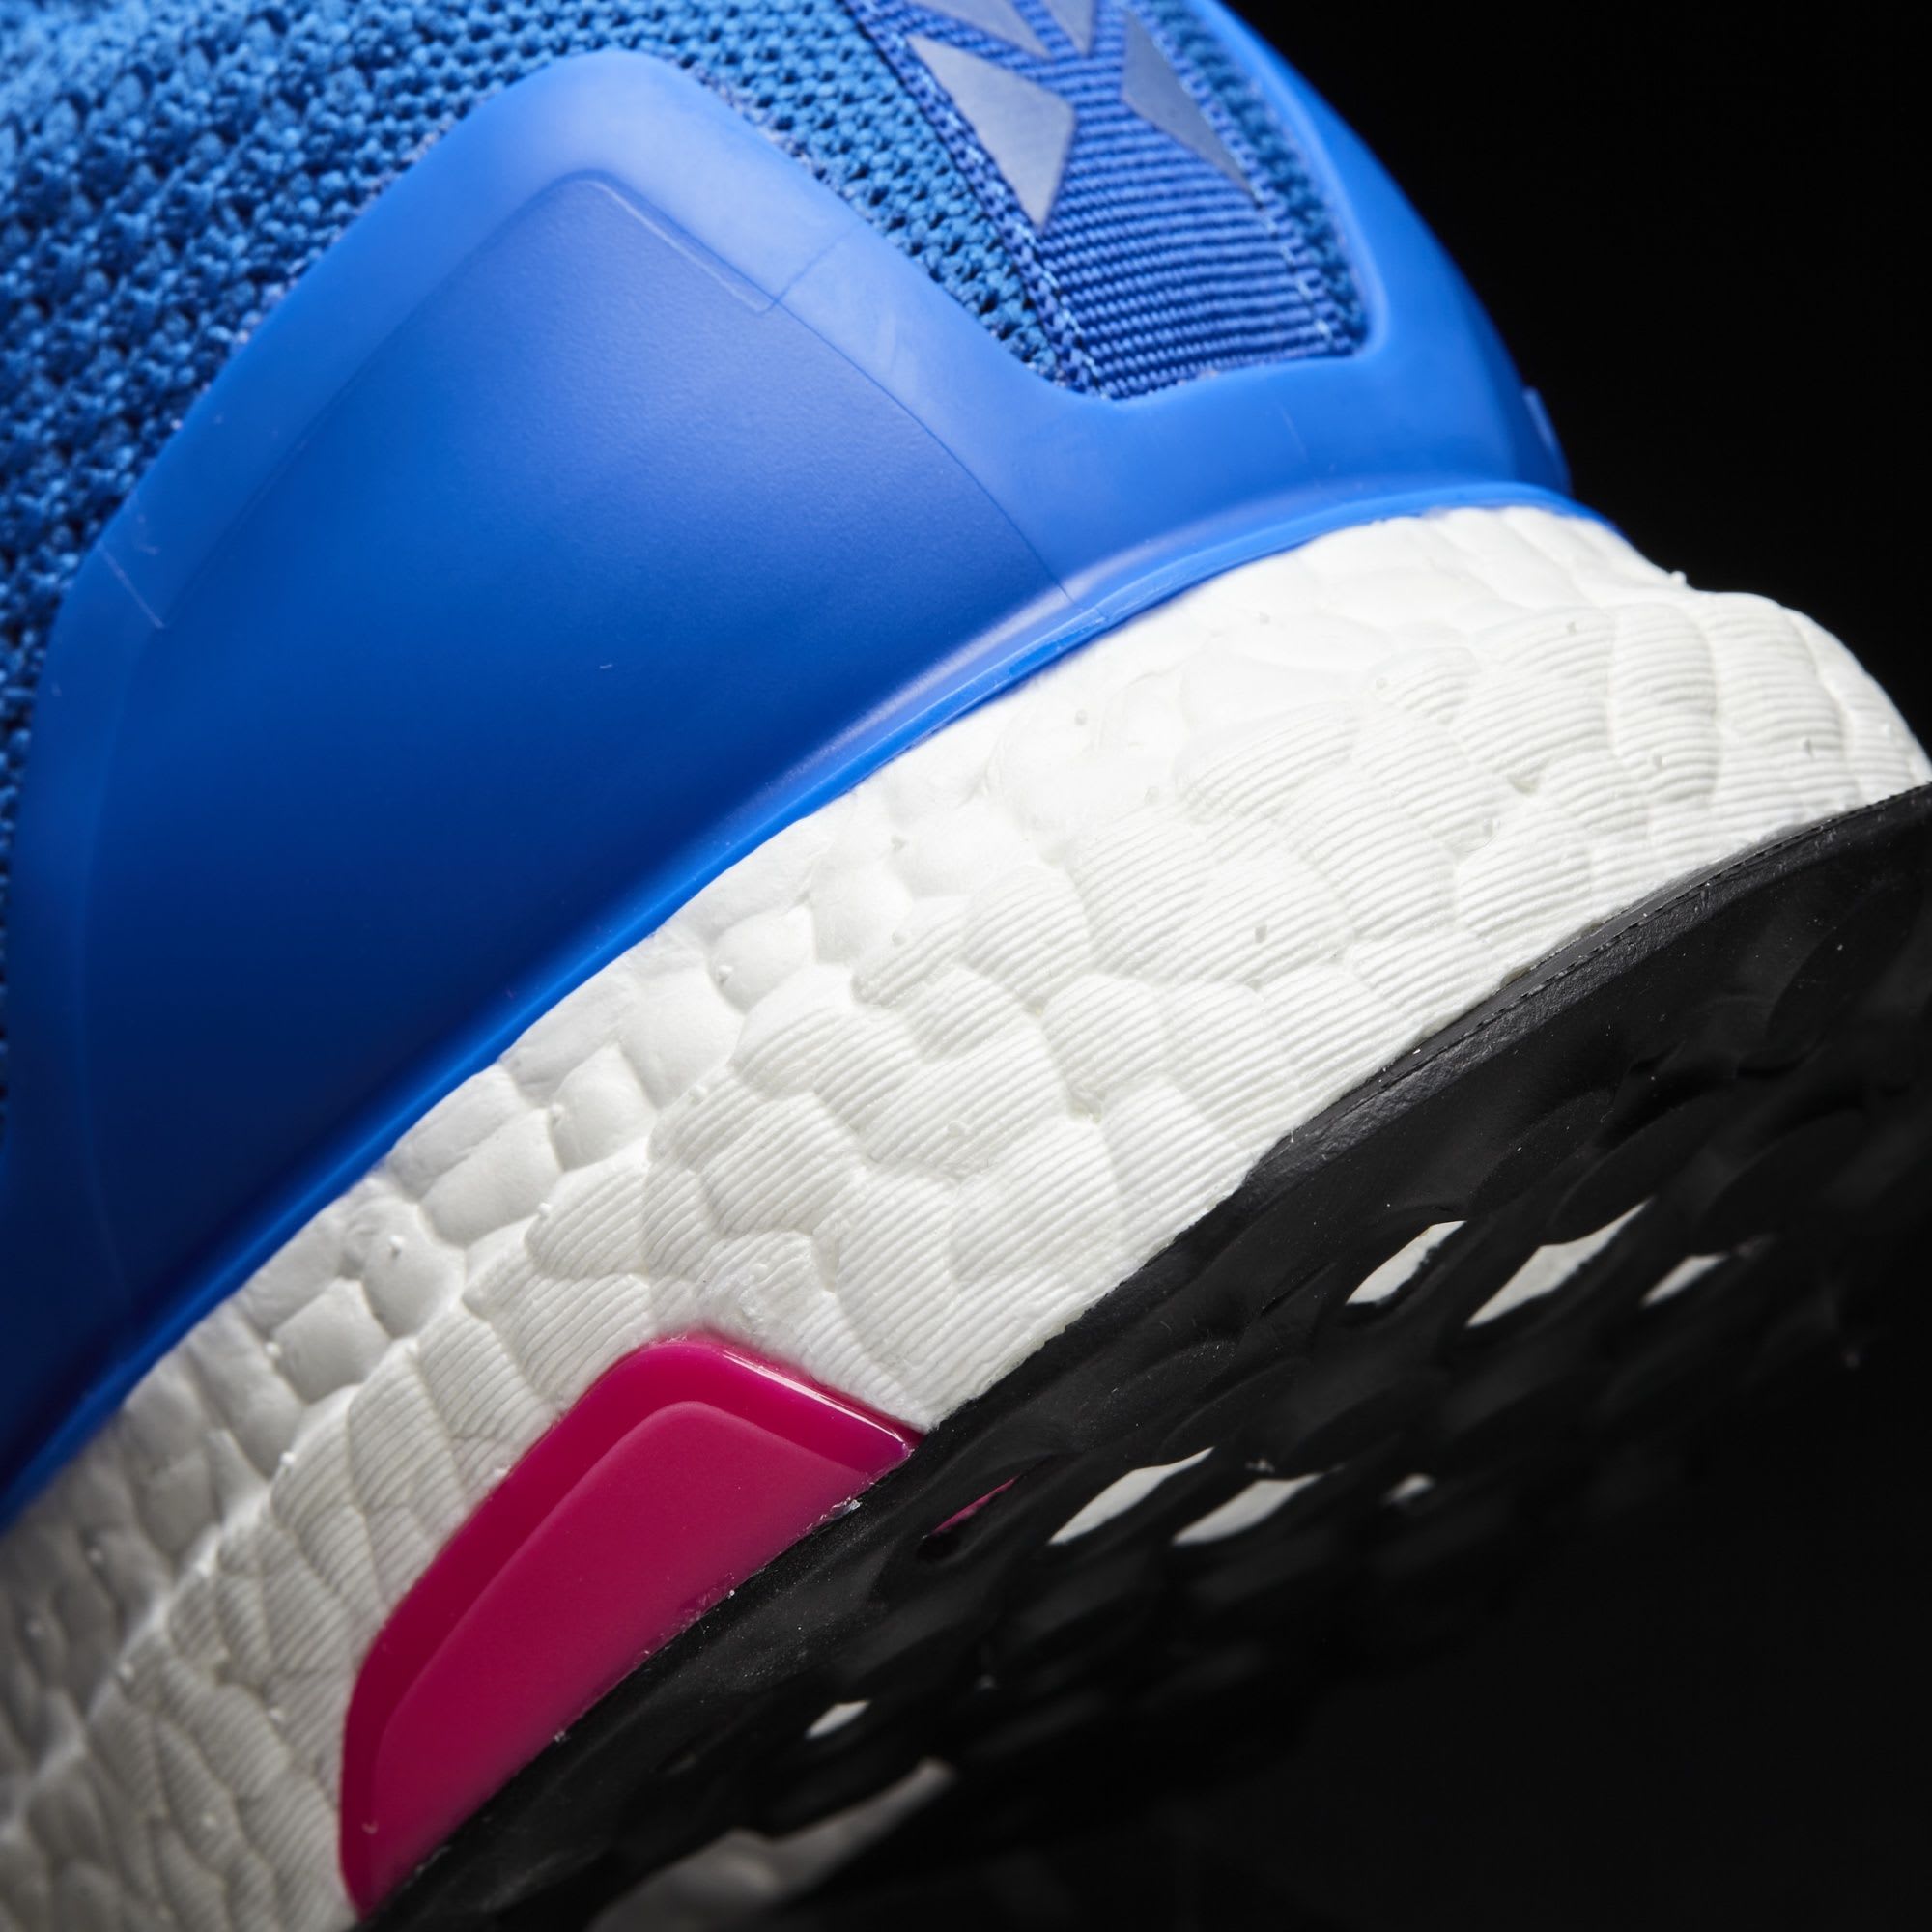 Adidas Ace 16 Pure Control Ultra Boost BY9090 Blue Pink Midsole